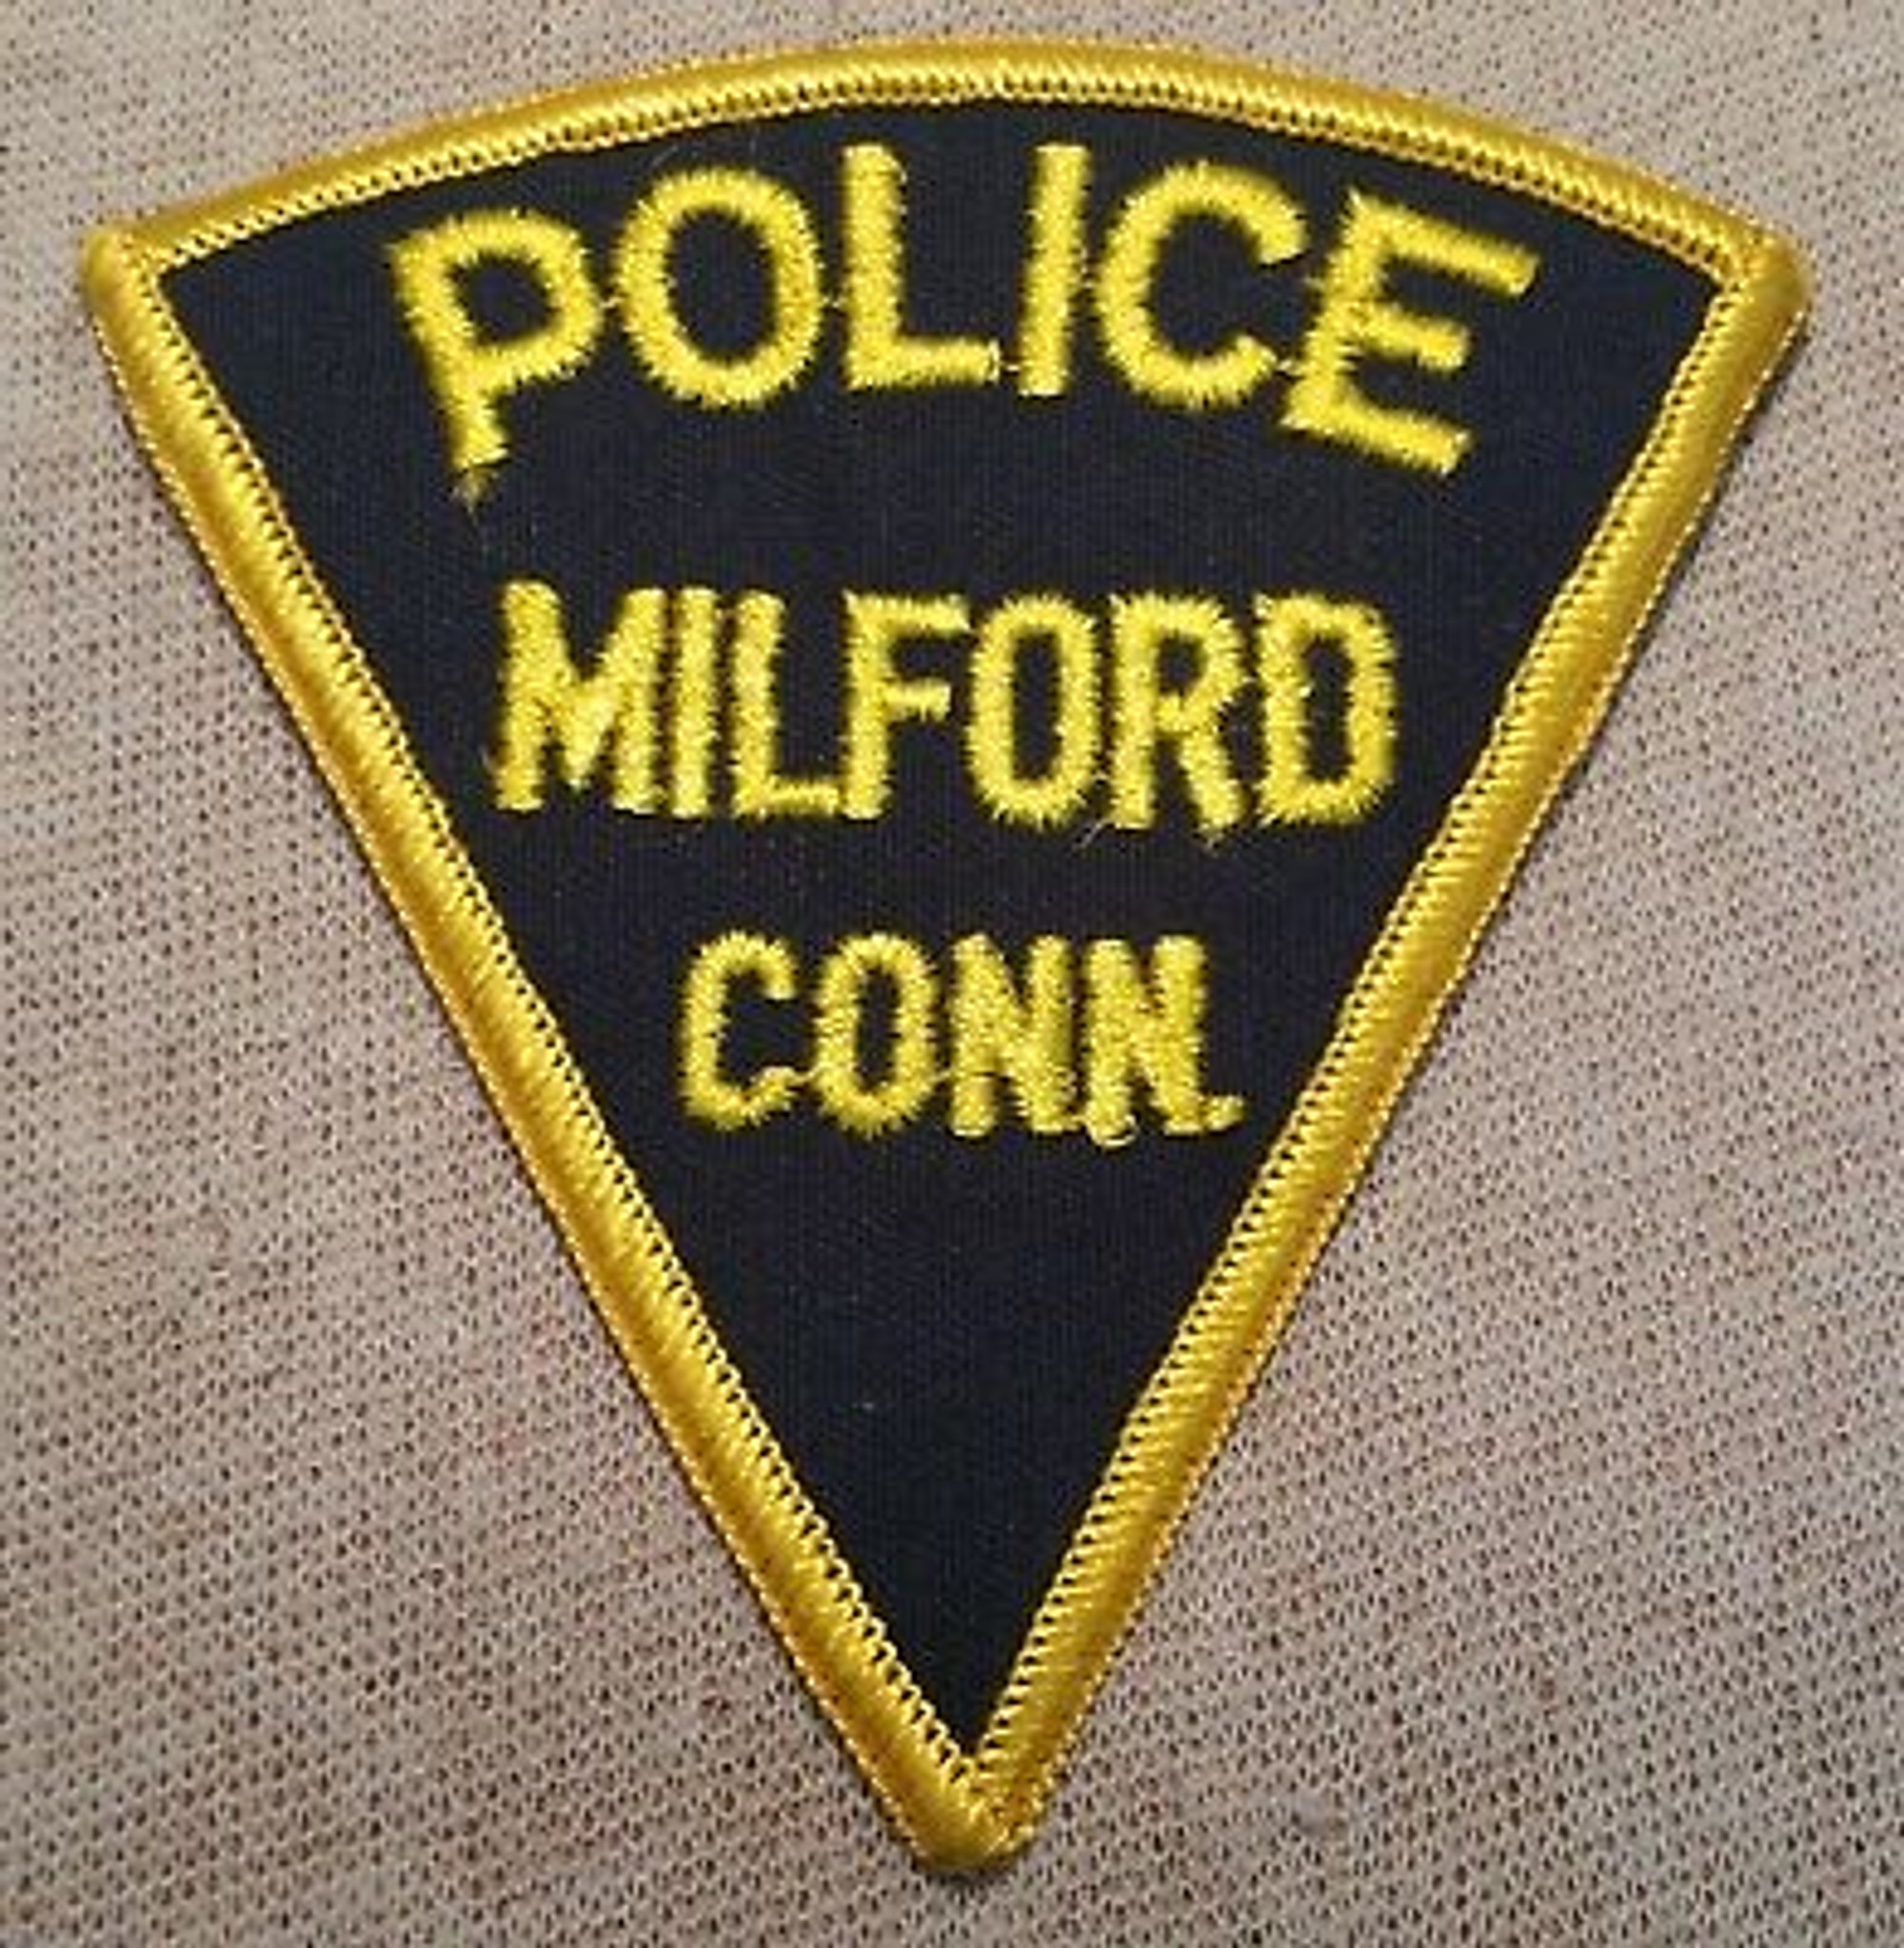 Milford CT Police Triangle Patch